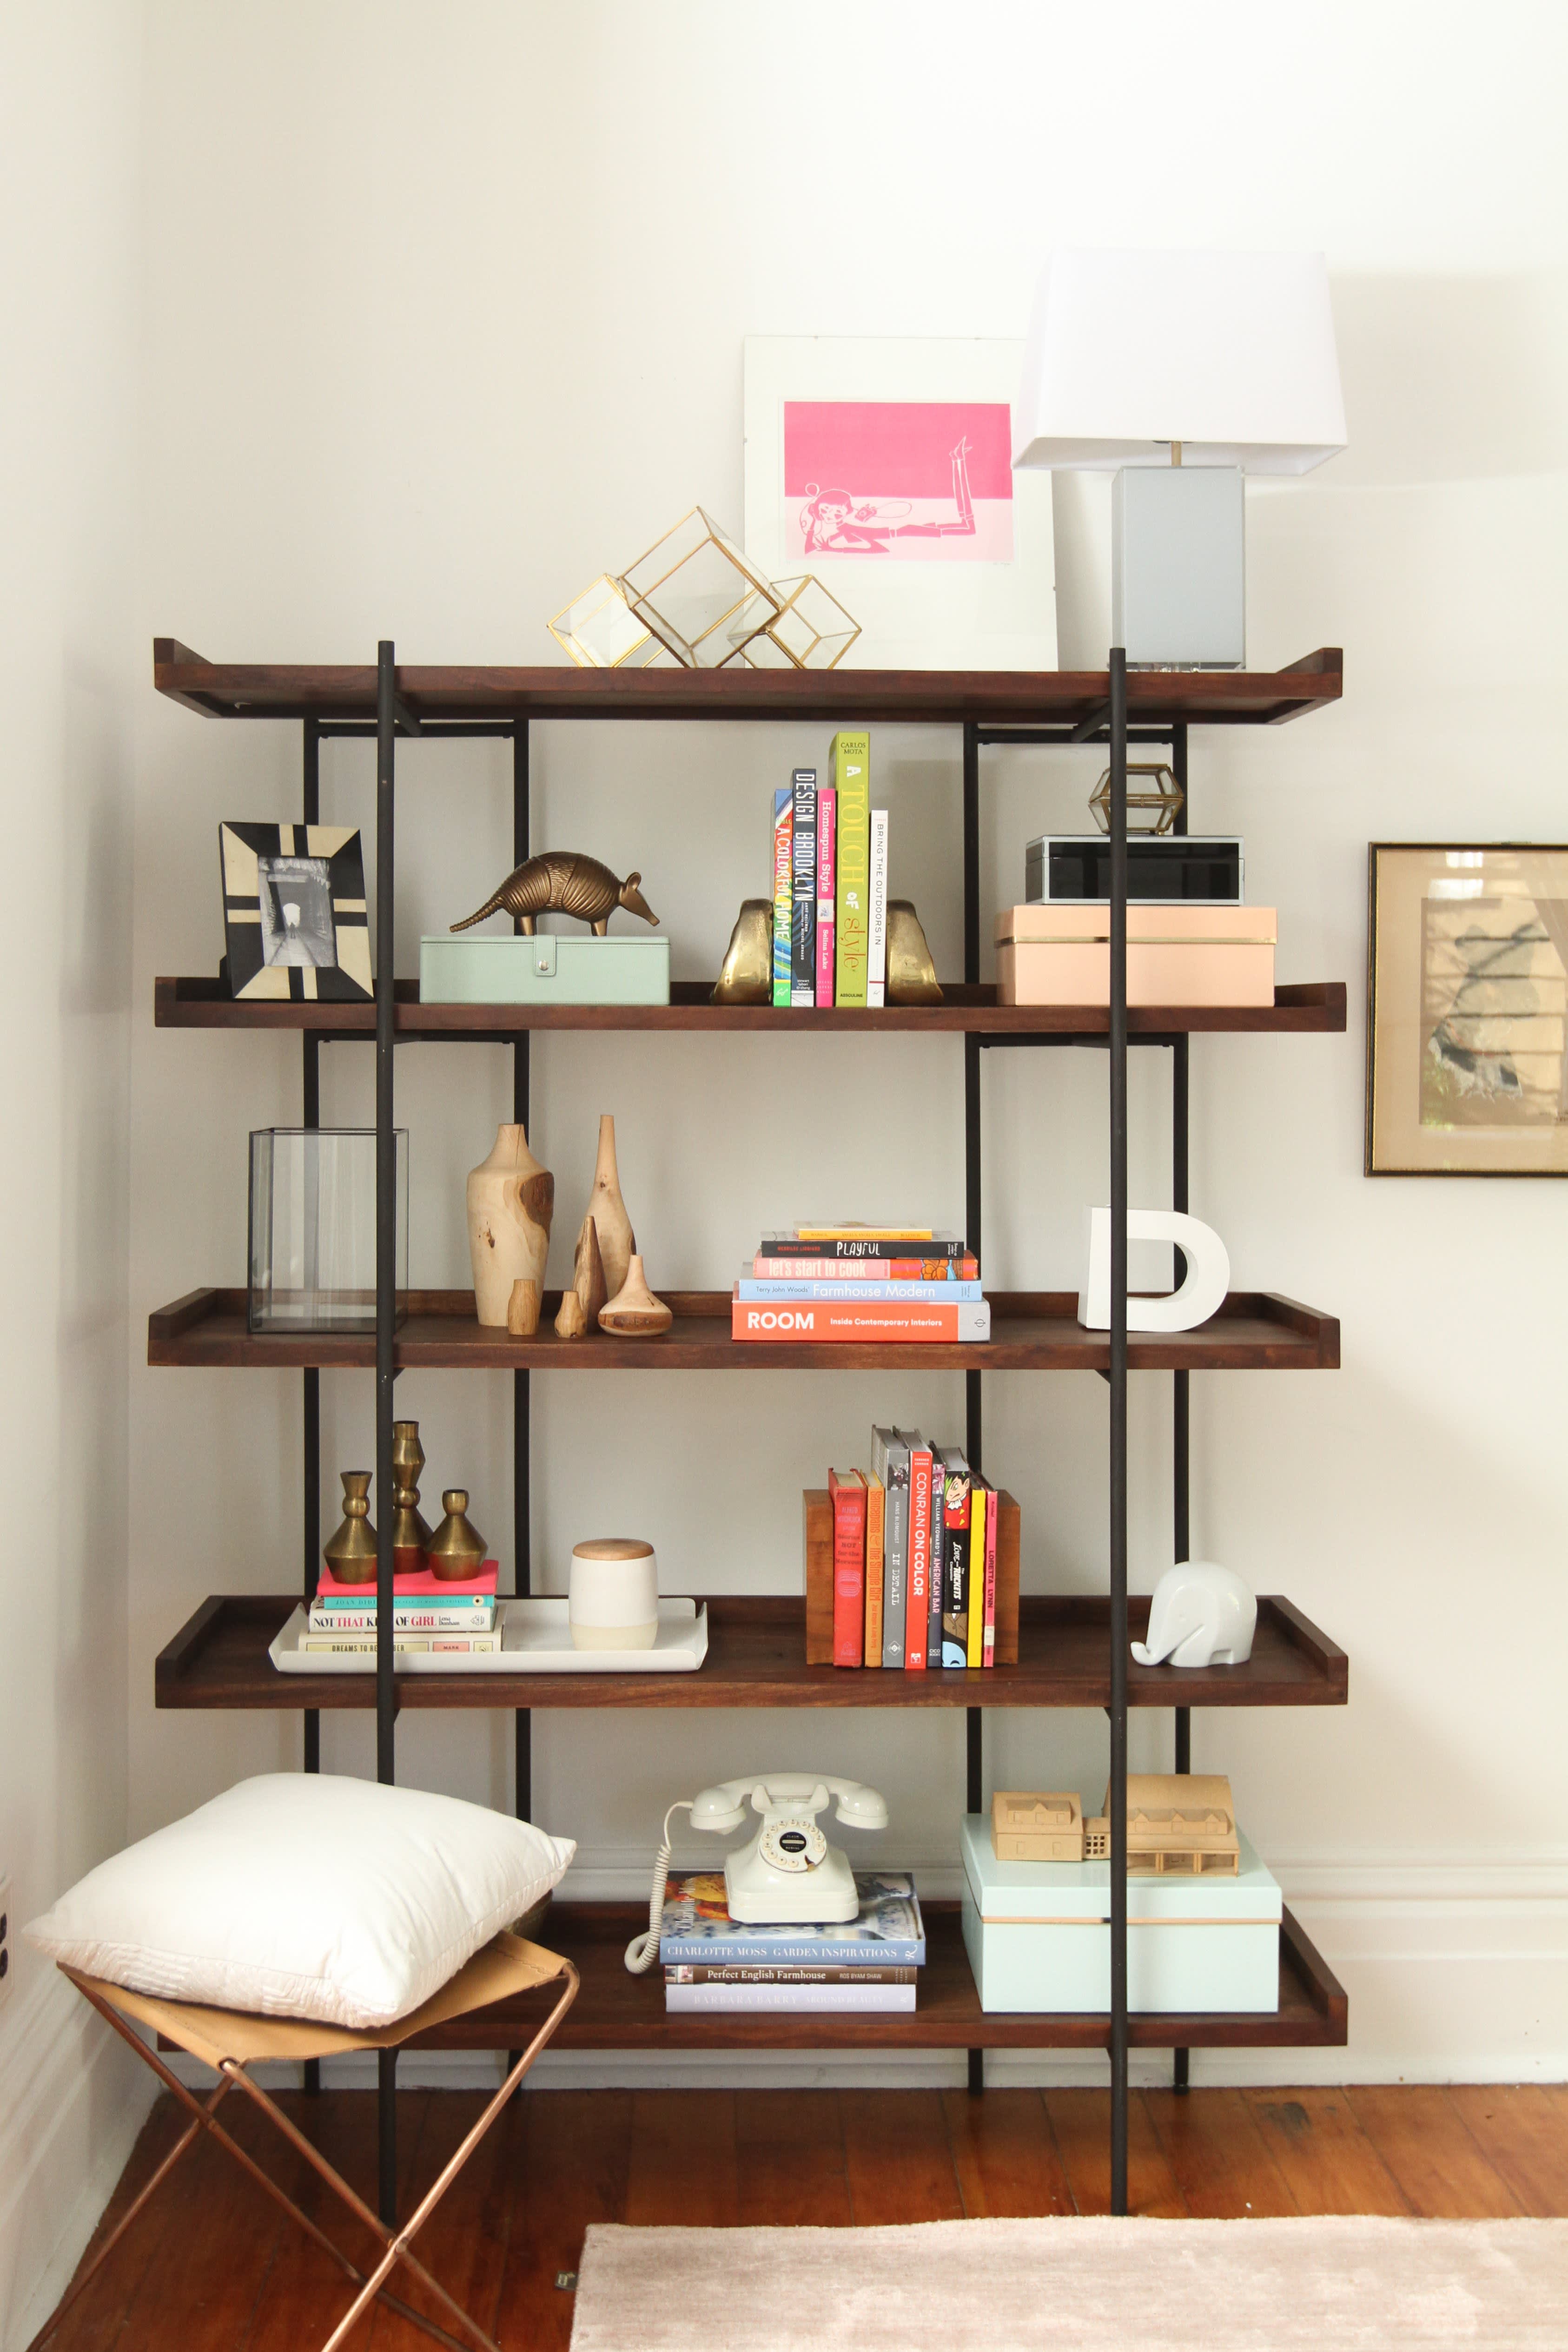 How To Style Bookshelves Layer By Layer | Apartment Therapy